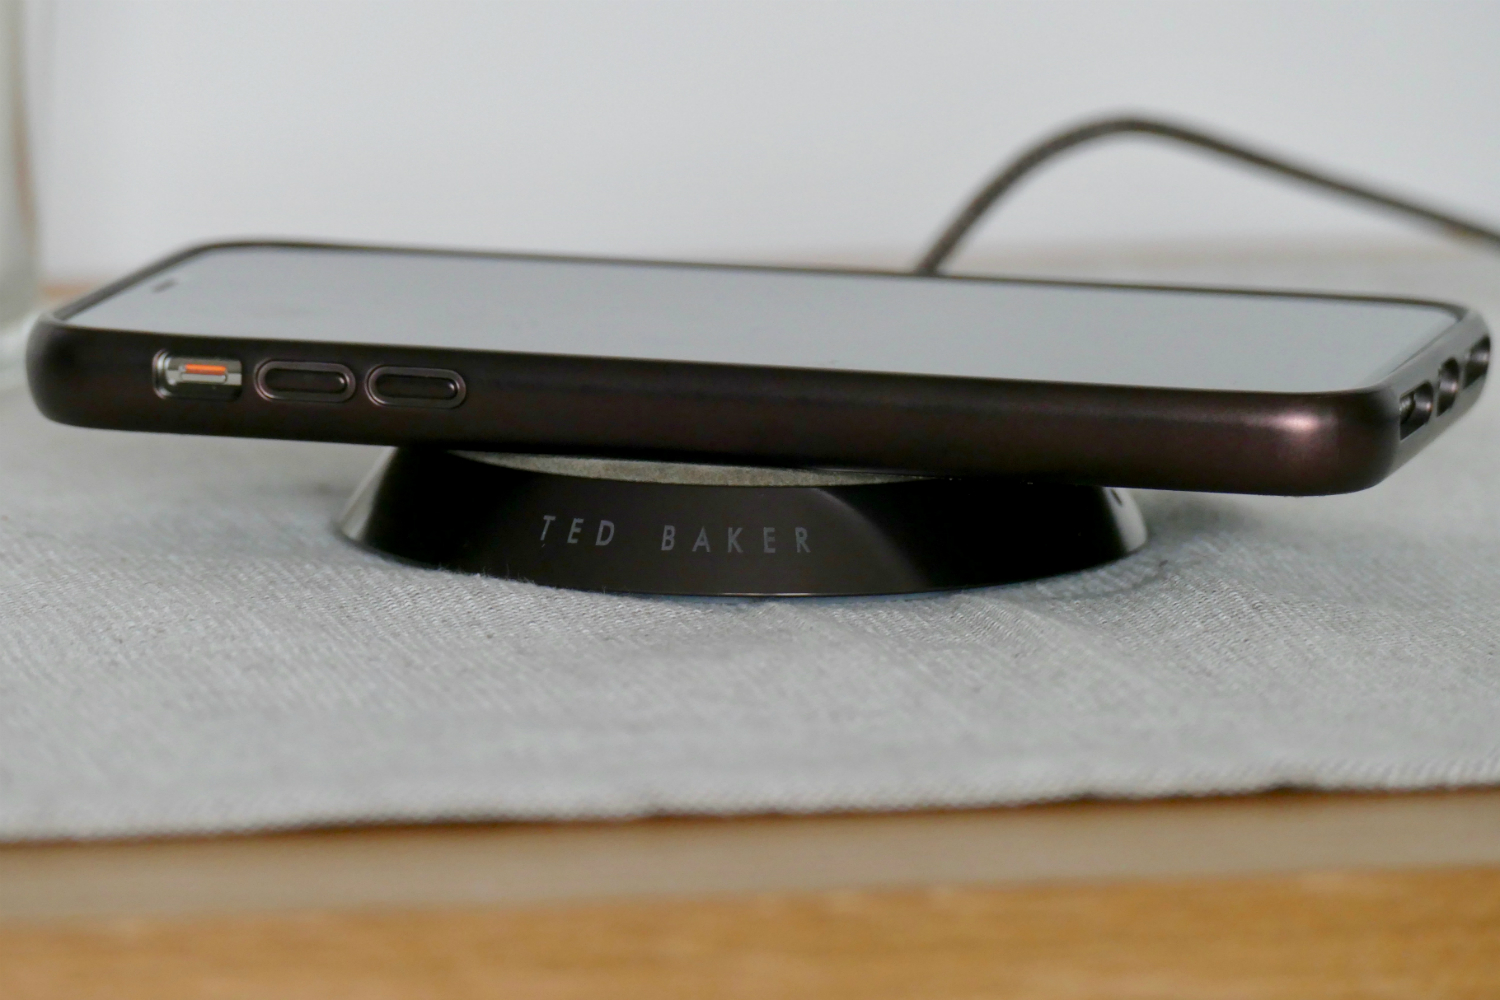 The Best Wireless Phone Chargers for iPhone or Android | Digital Trends